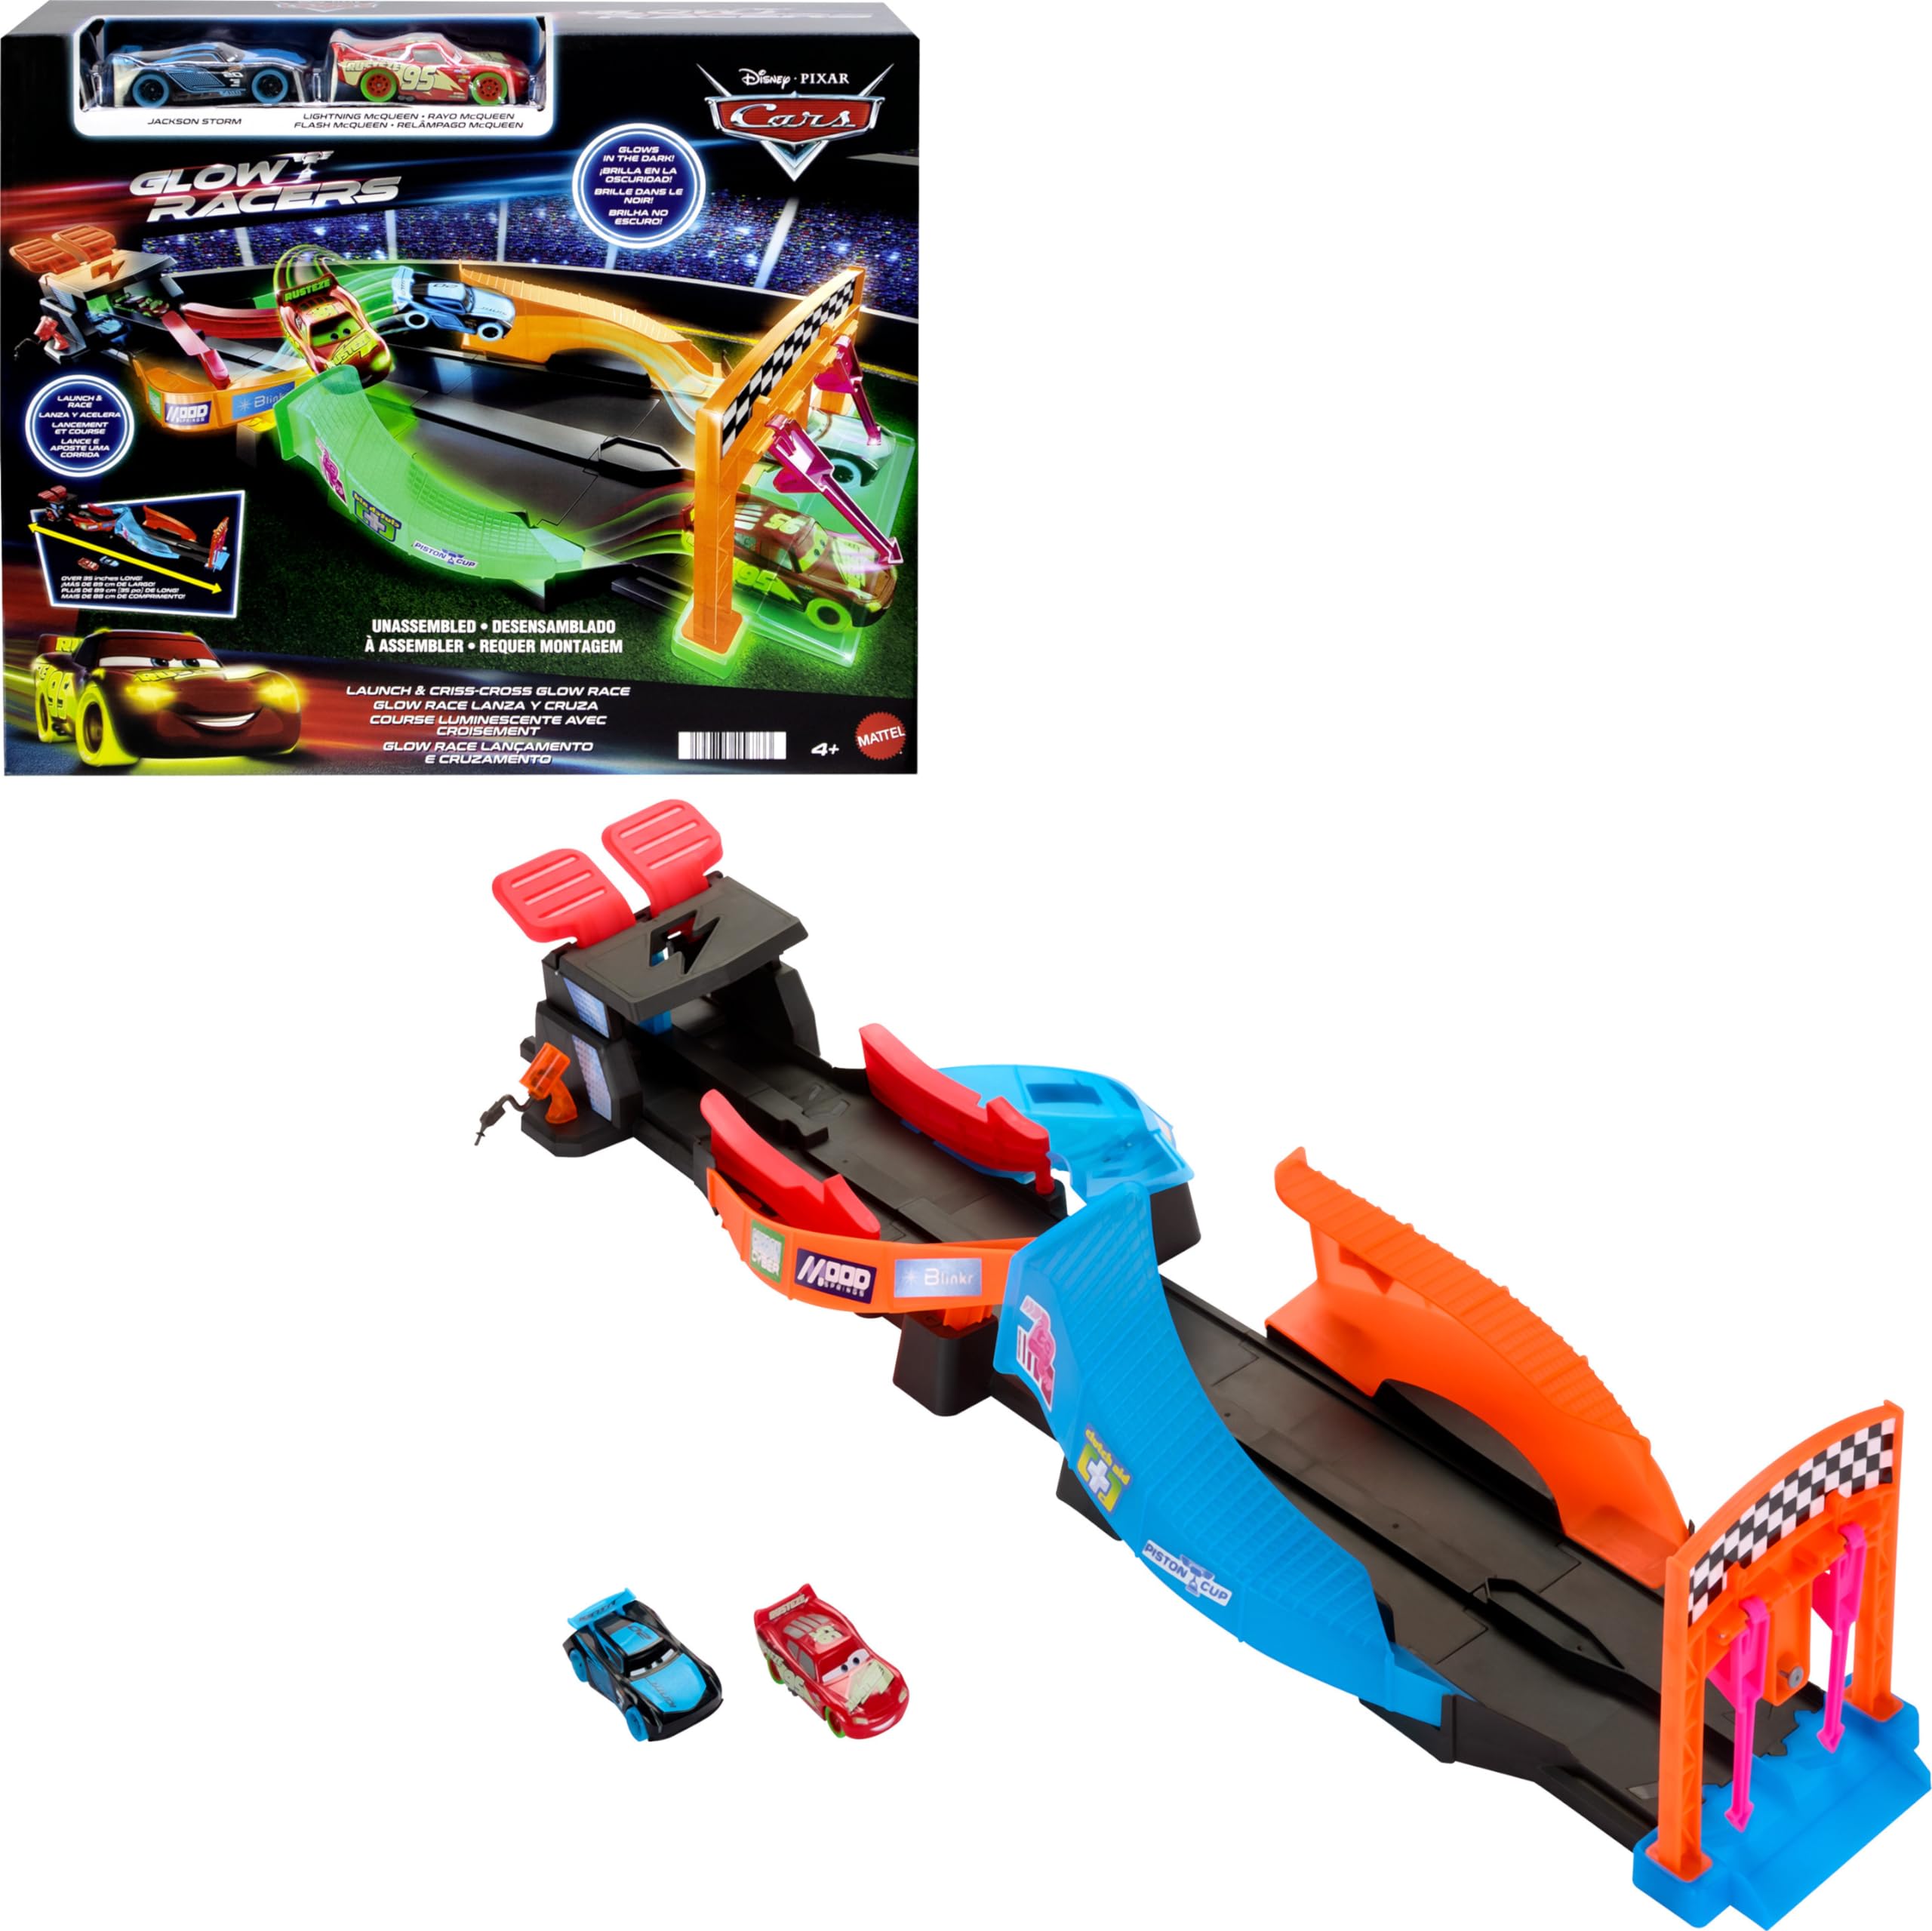 Mattel Disney Cars Toys Disney and Pixar Cars Glow Racers Launch ‘N Criss-Cross Playset with 2 Glow-in-the-Dark Toy Cars Including Lightning McQueen & Jackson Storm